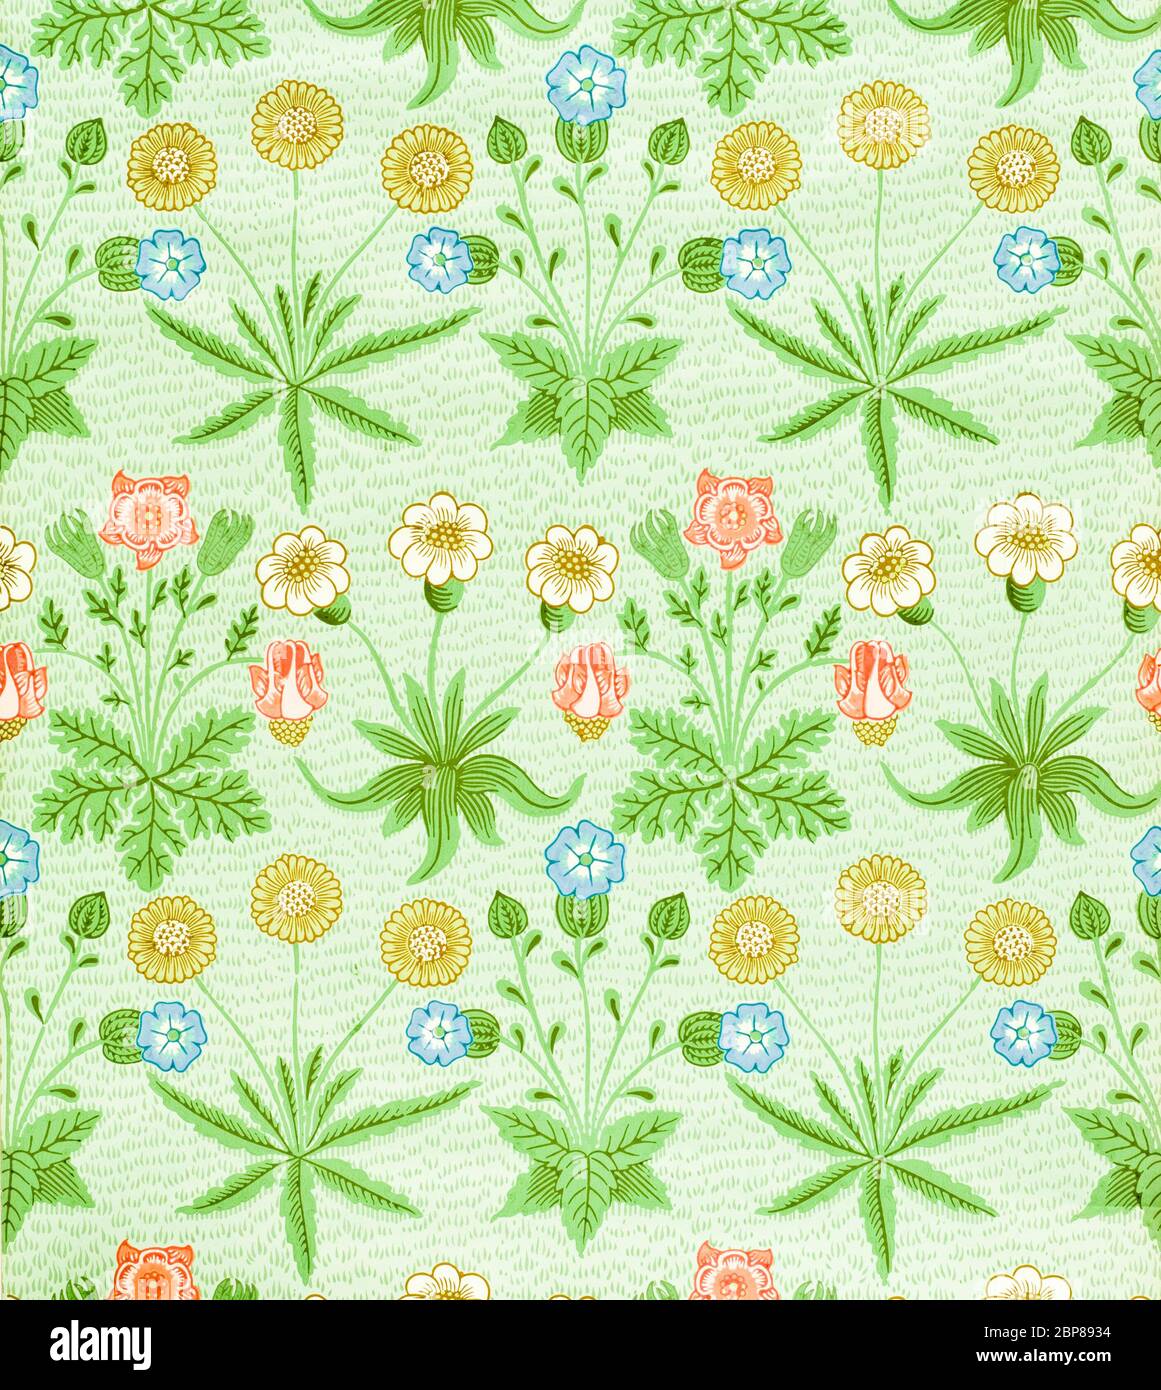 William Morris, Morris & Co, Daisy, wallpaper pattern, 1862-1864, Arts and Crafts Movement Stock Photo